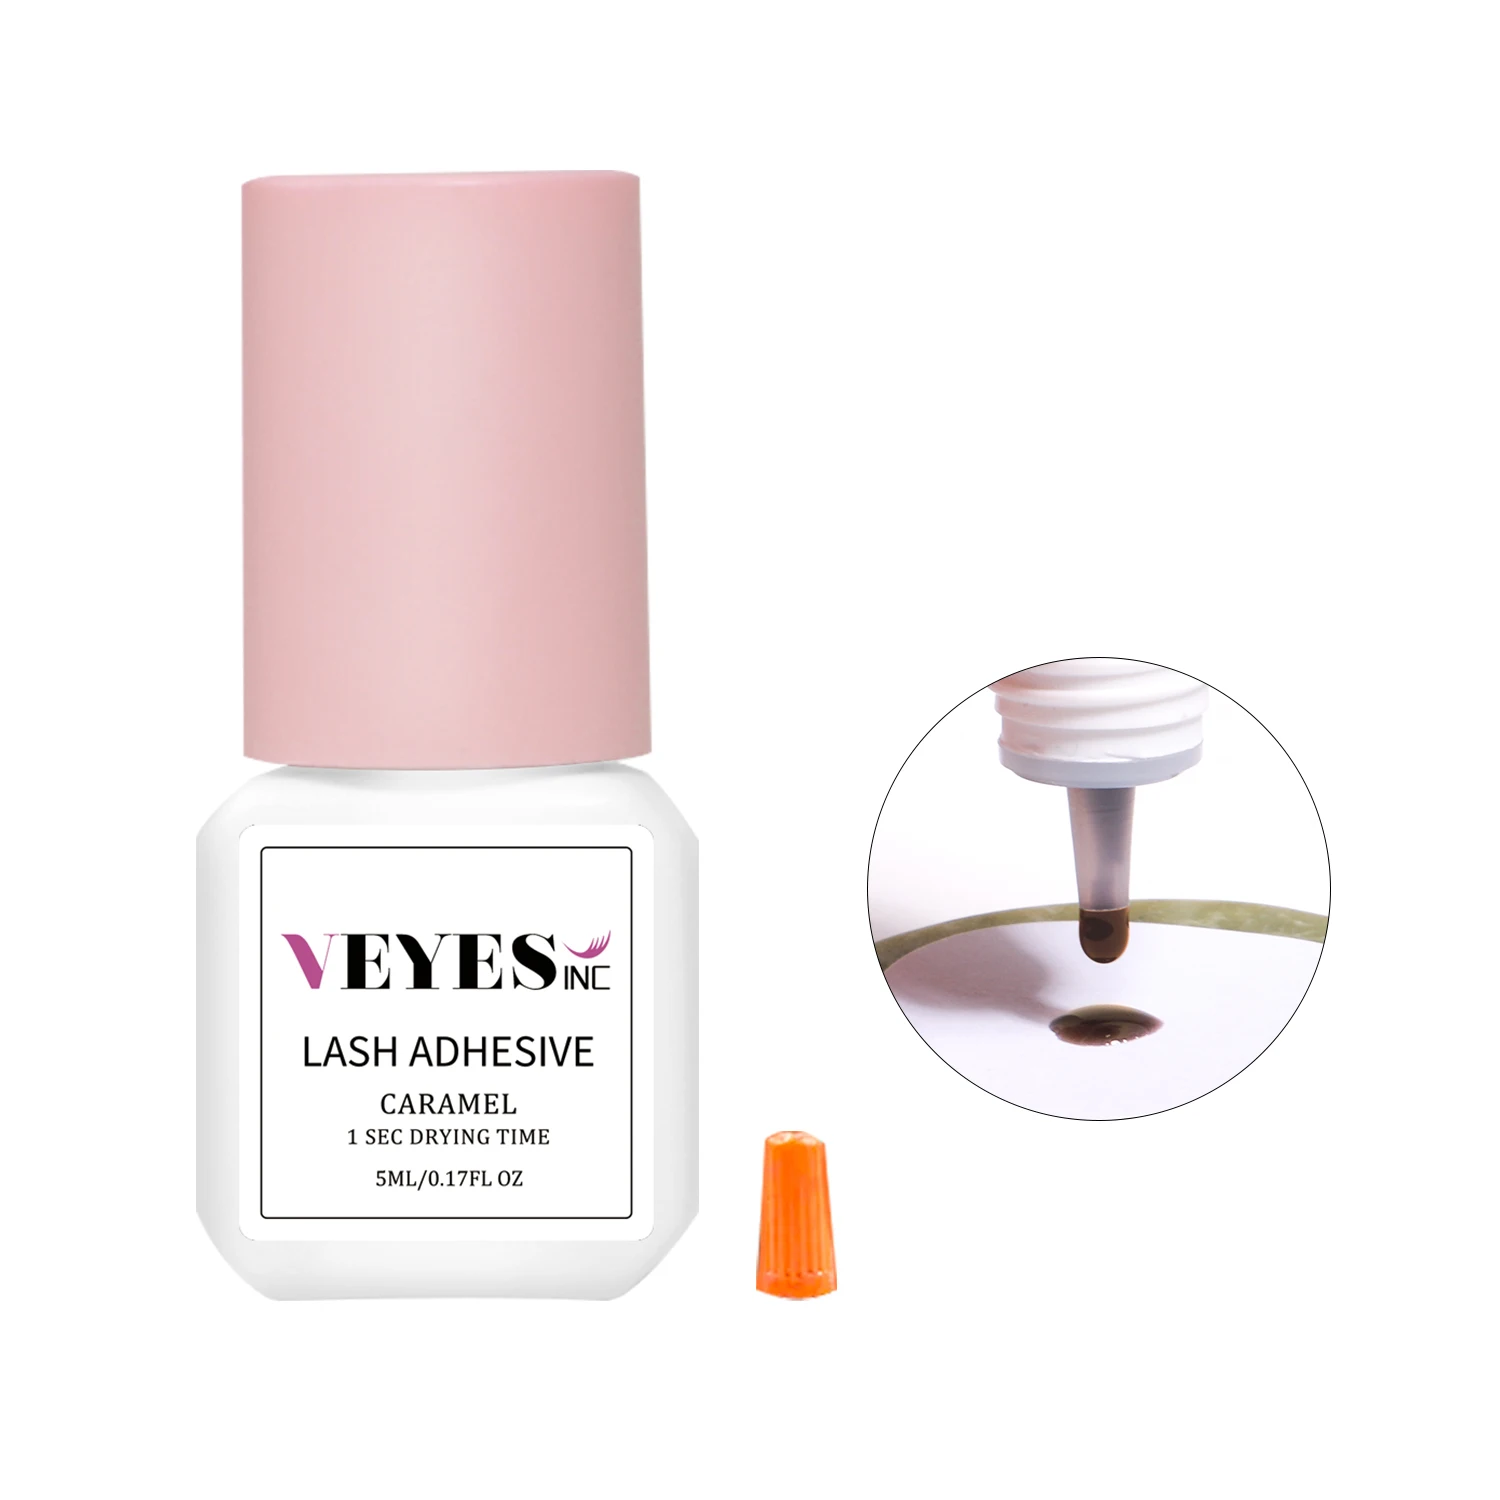 

VEYES Brown Color Low Humidity Lash Extension Adhesive 1 Second Drying Time Korea Lash Extension Glue for Eyelash Extensions